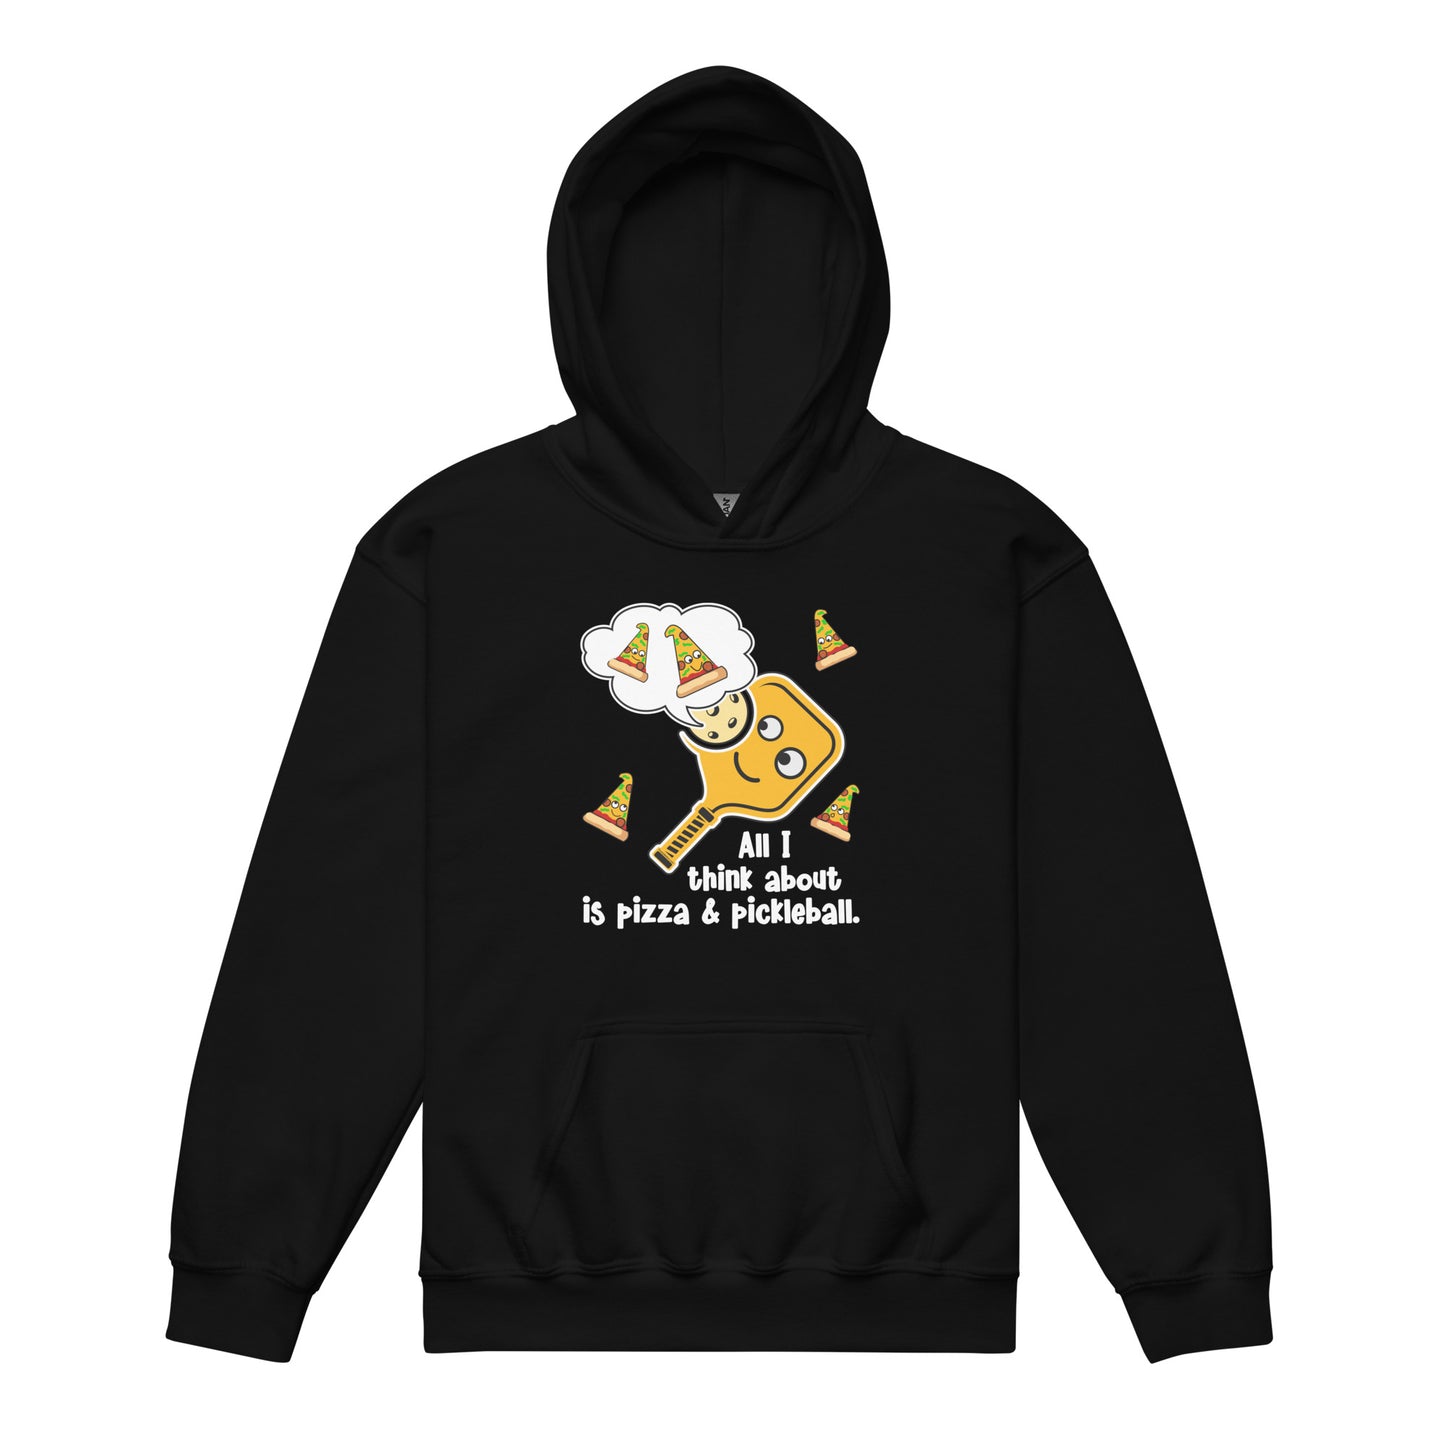 Fun Pickleball Pun: "All I Think About Is Pizza And Pickleball" Youth Heavy Blend Hoodie